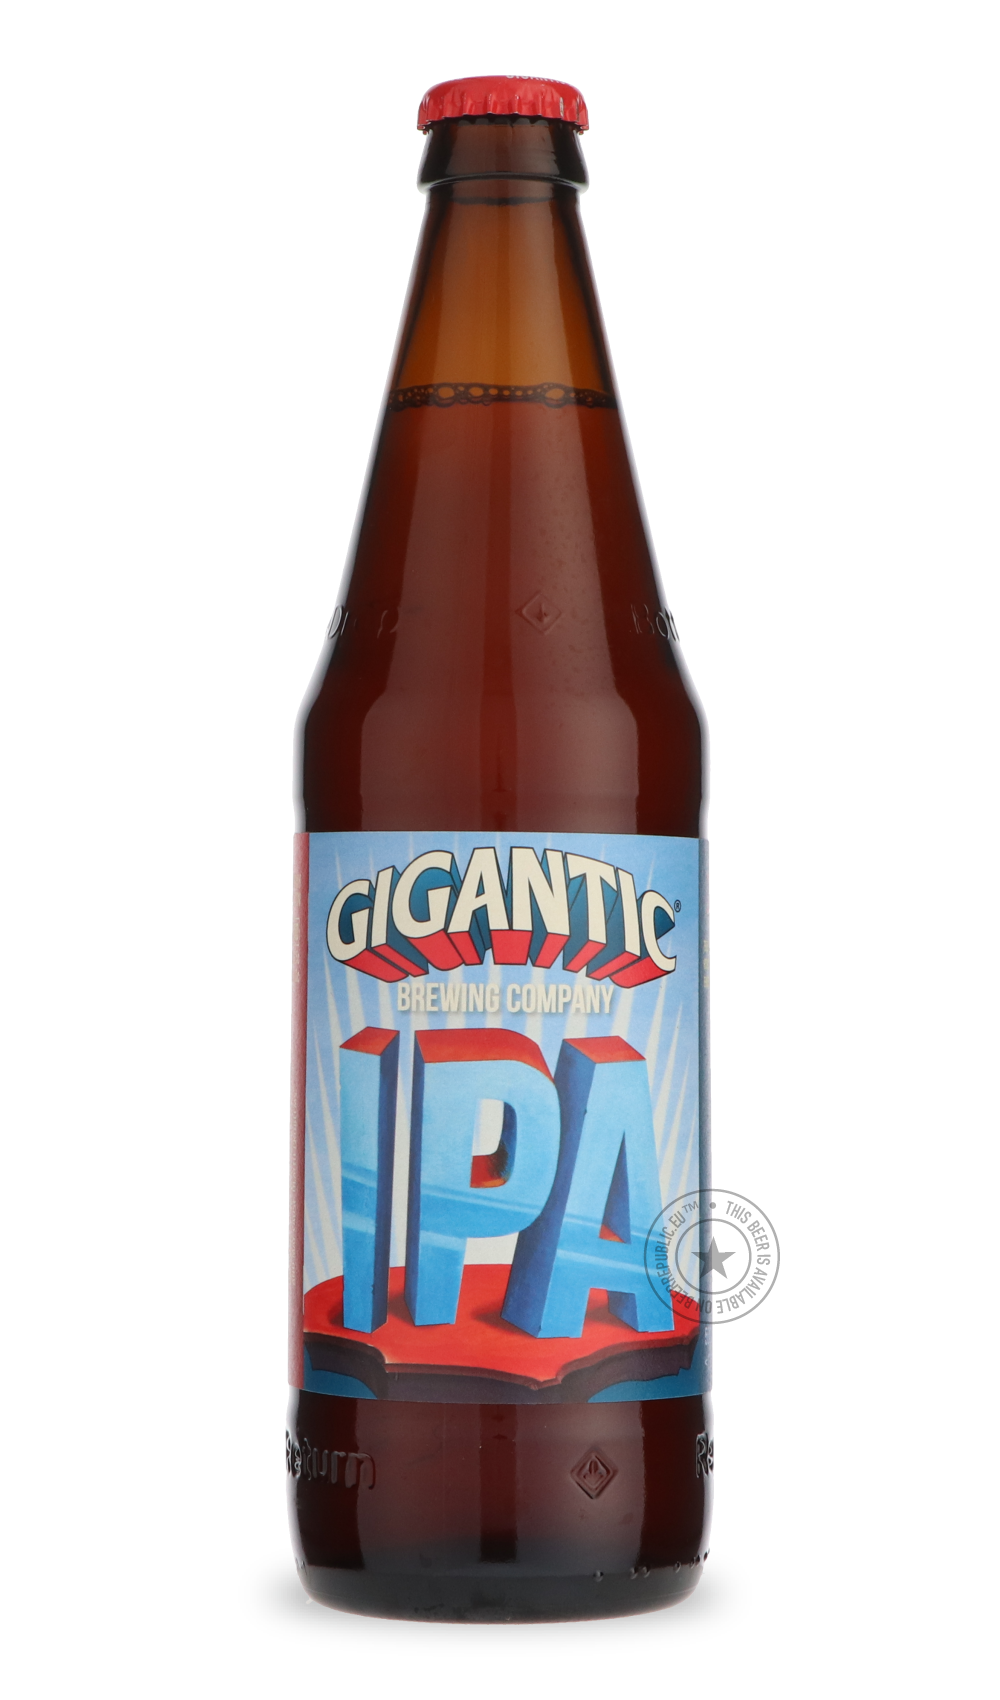 -Gigantic- Gigantic IPA-IPA- Only @ Beer Republic - The best online beer store for American & Canadian craft beer - Buy beer online from the USA and Canada - Bier online kopen - Amerikaans bier kopen - Craft beer store - Craft beer kopen - Amerikanisch bier kaufen - Bier online kaufen - Acheter biere online - IPA - Stout - Porter - New England IPA - Hazy IPA - Imperial Stout - Barrel Aged - Barrel Aged Imperial Stout - Brown - Dark beer - Blond - Blonde - Pilsner - Lager - Wheat - Weizen - Amber - Barley Wi